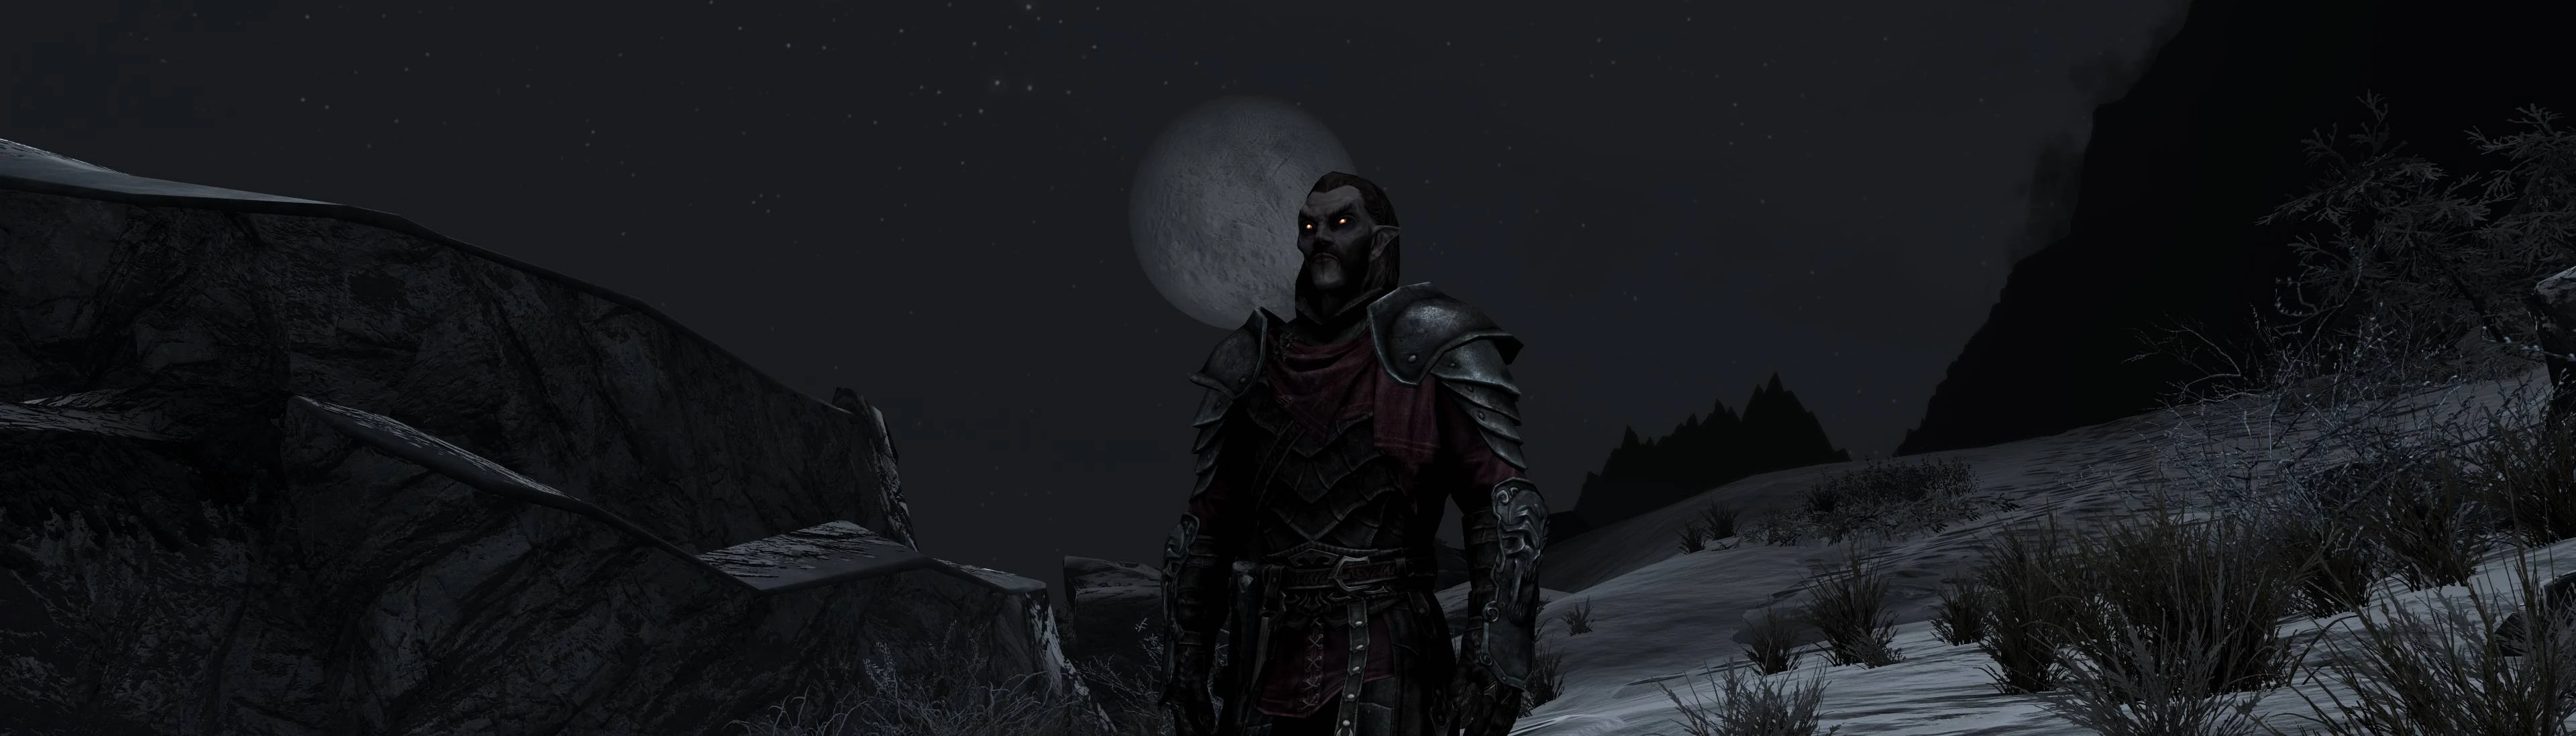 Skyrim vampire lord choice, powers, weaknesses and cure